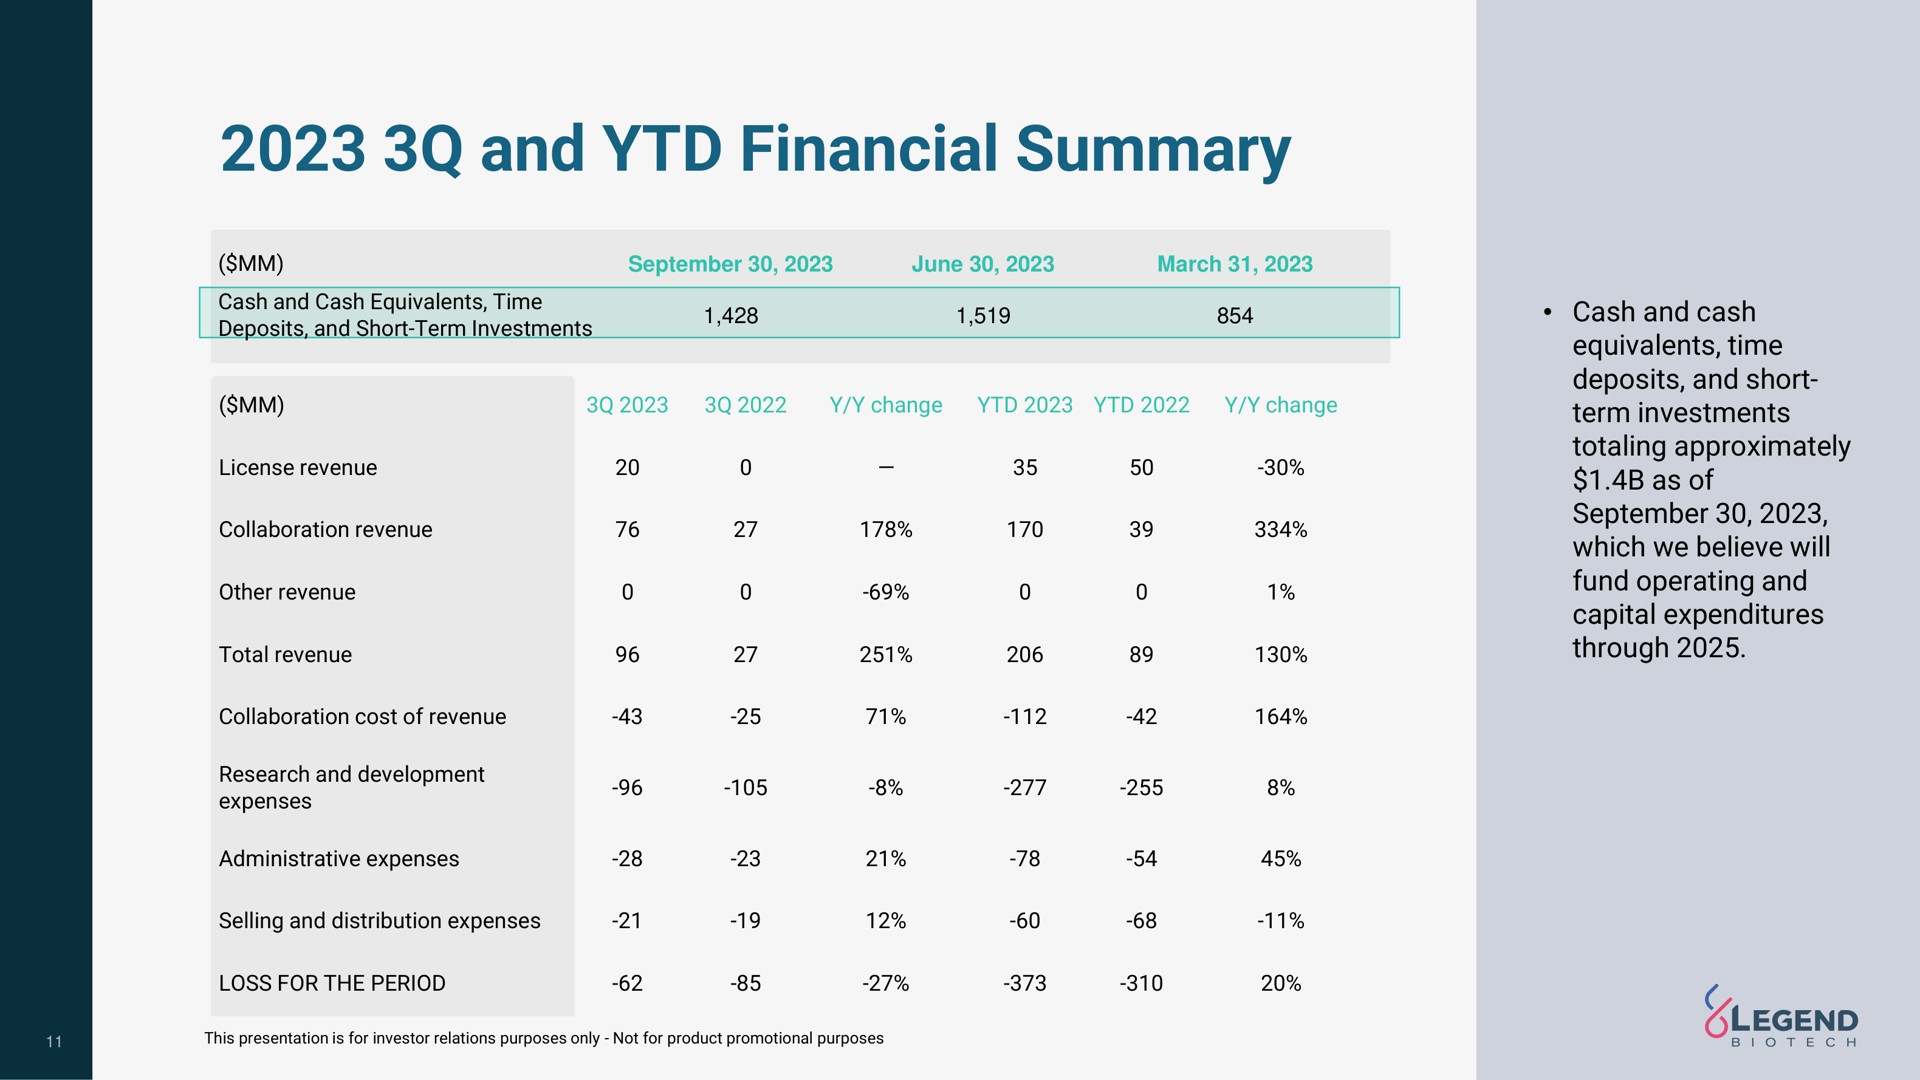 and financial summary | Legend Biotech